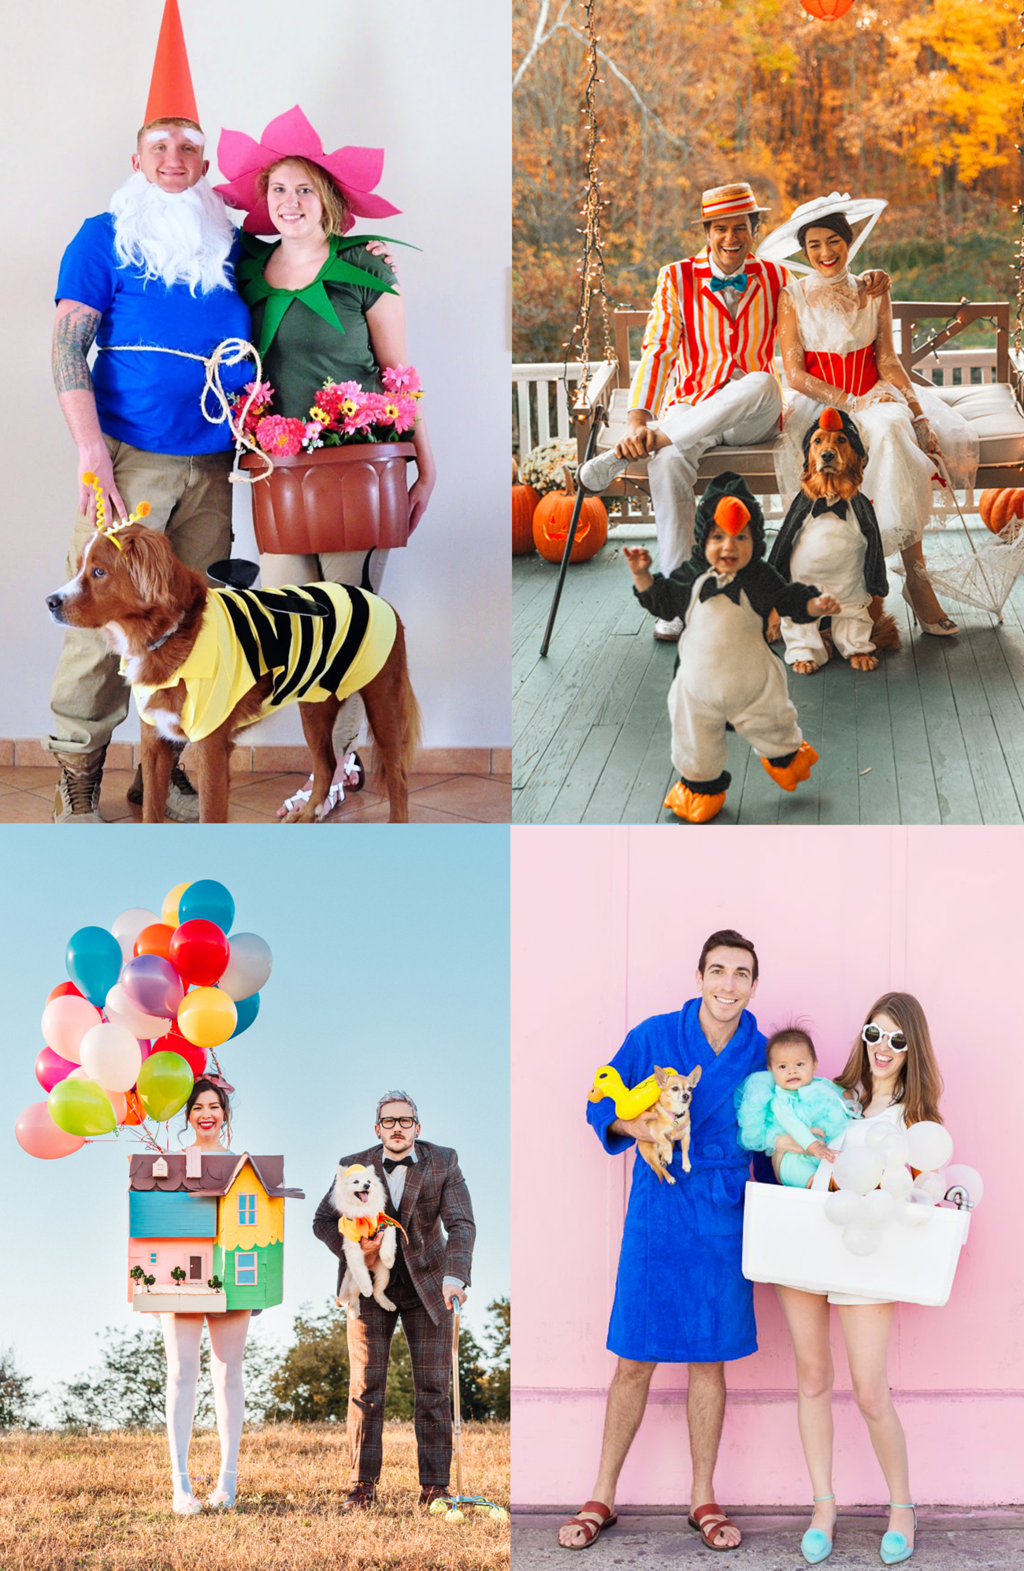 It Takes Two cosplay  Cute couple halloween costumes, Couples halloween  outfits, Funny couple halloween costumes